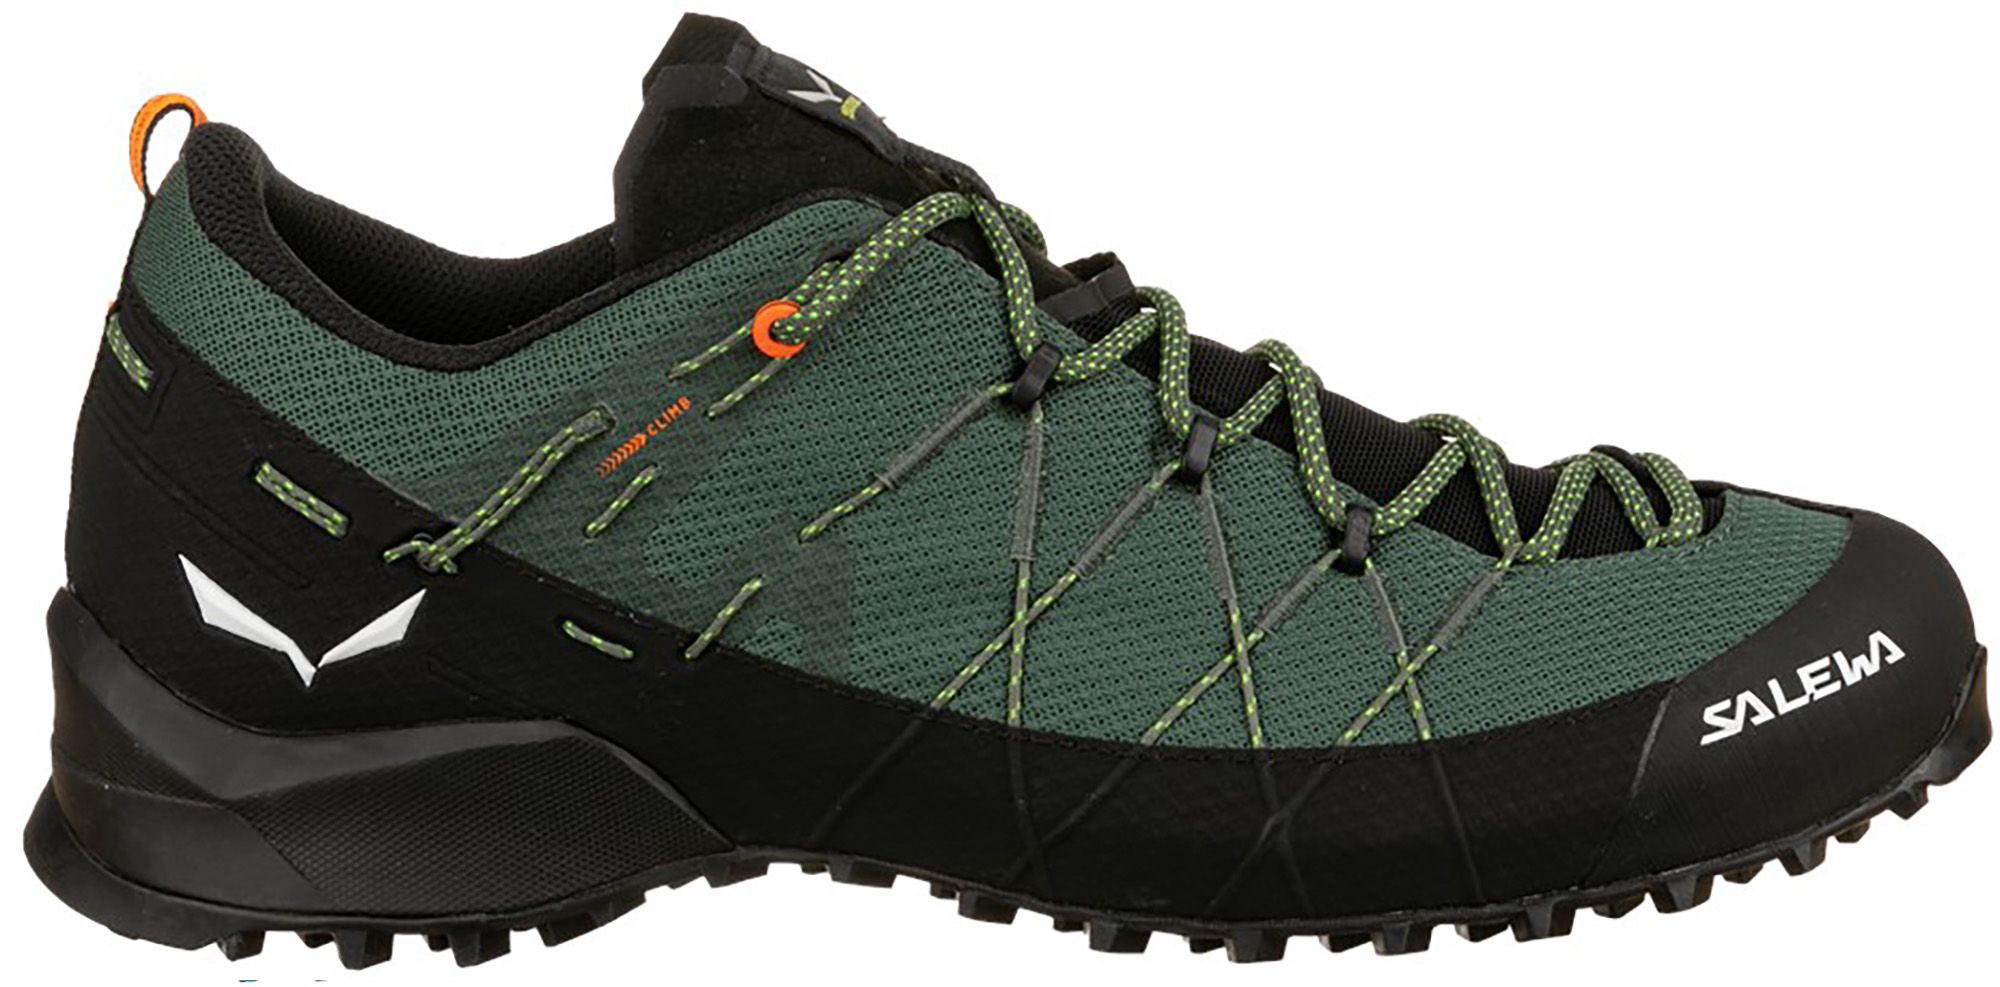 Photos - Trekking Shoes Salewa Men's Wildfire 2 Approach Shoes, Size 9.5, Black/Green 22IYPMMWLDFR 